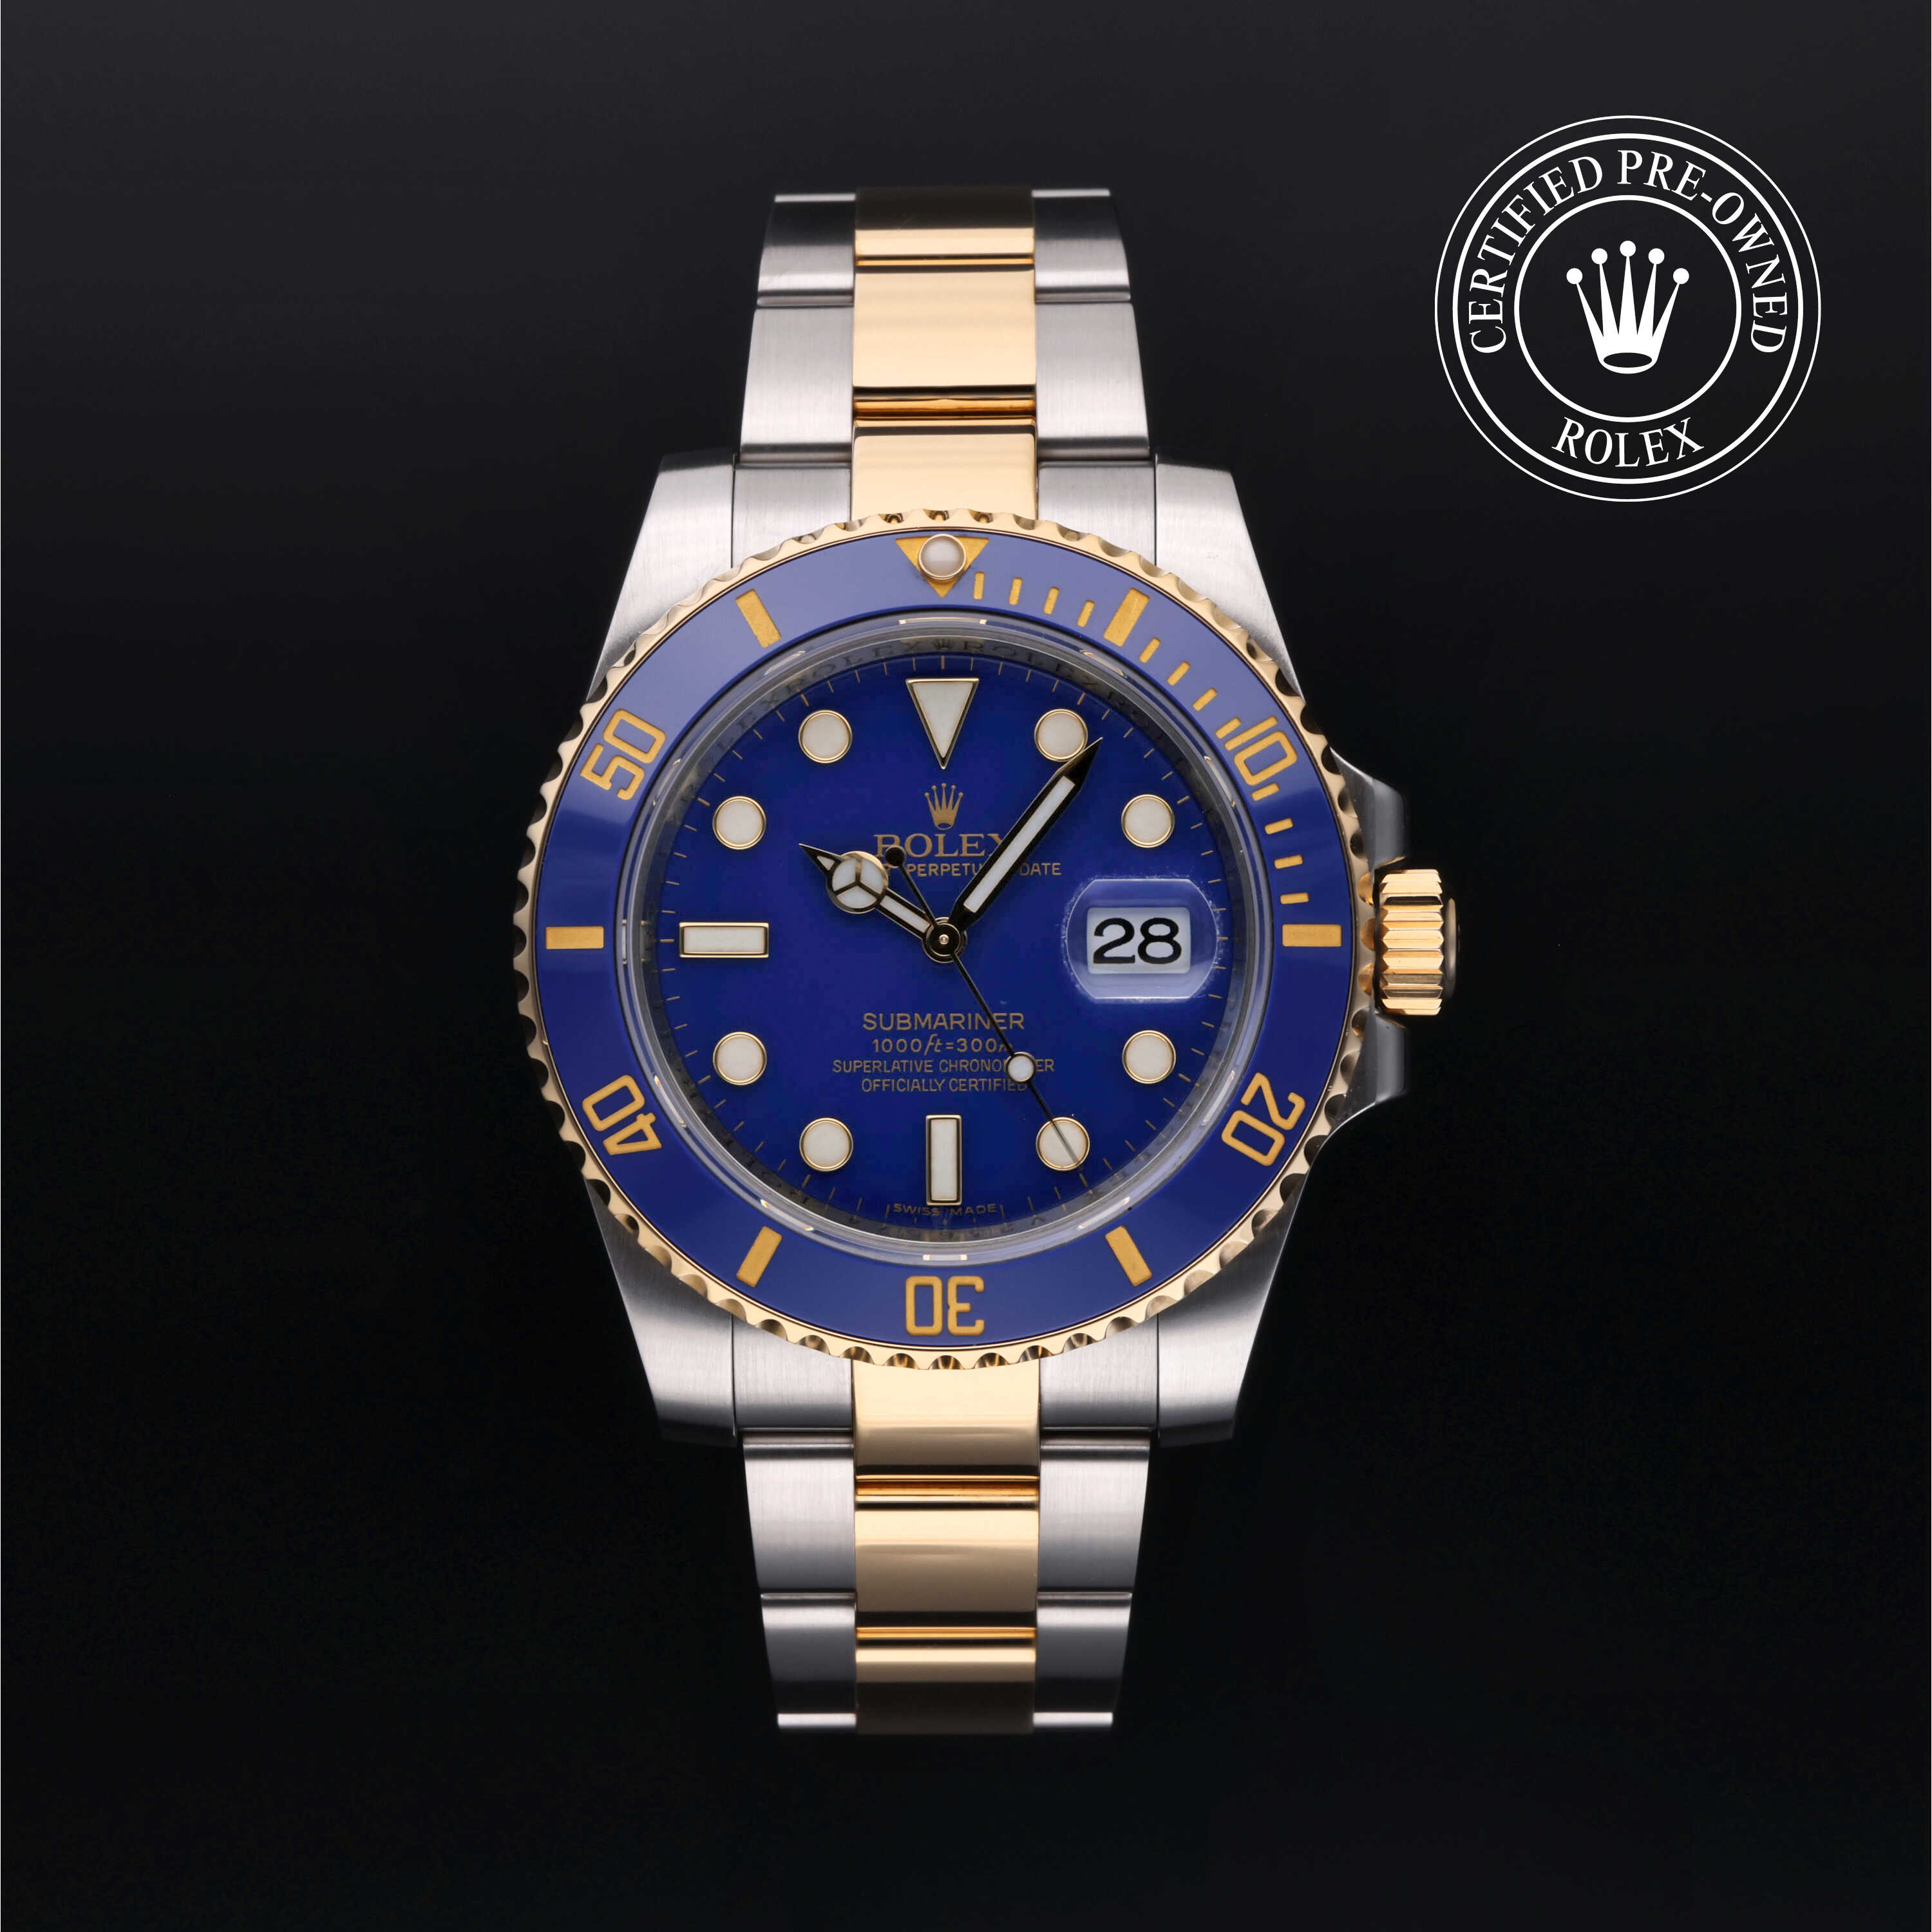 Rolex ® Submariner Official Certified Pre-Owned